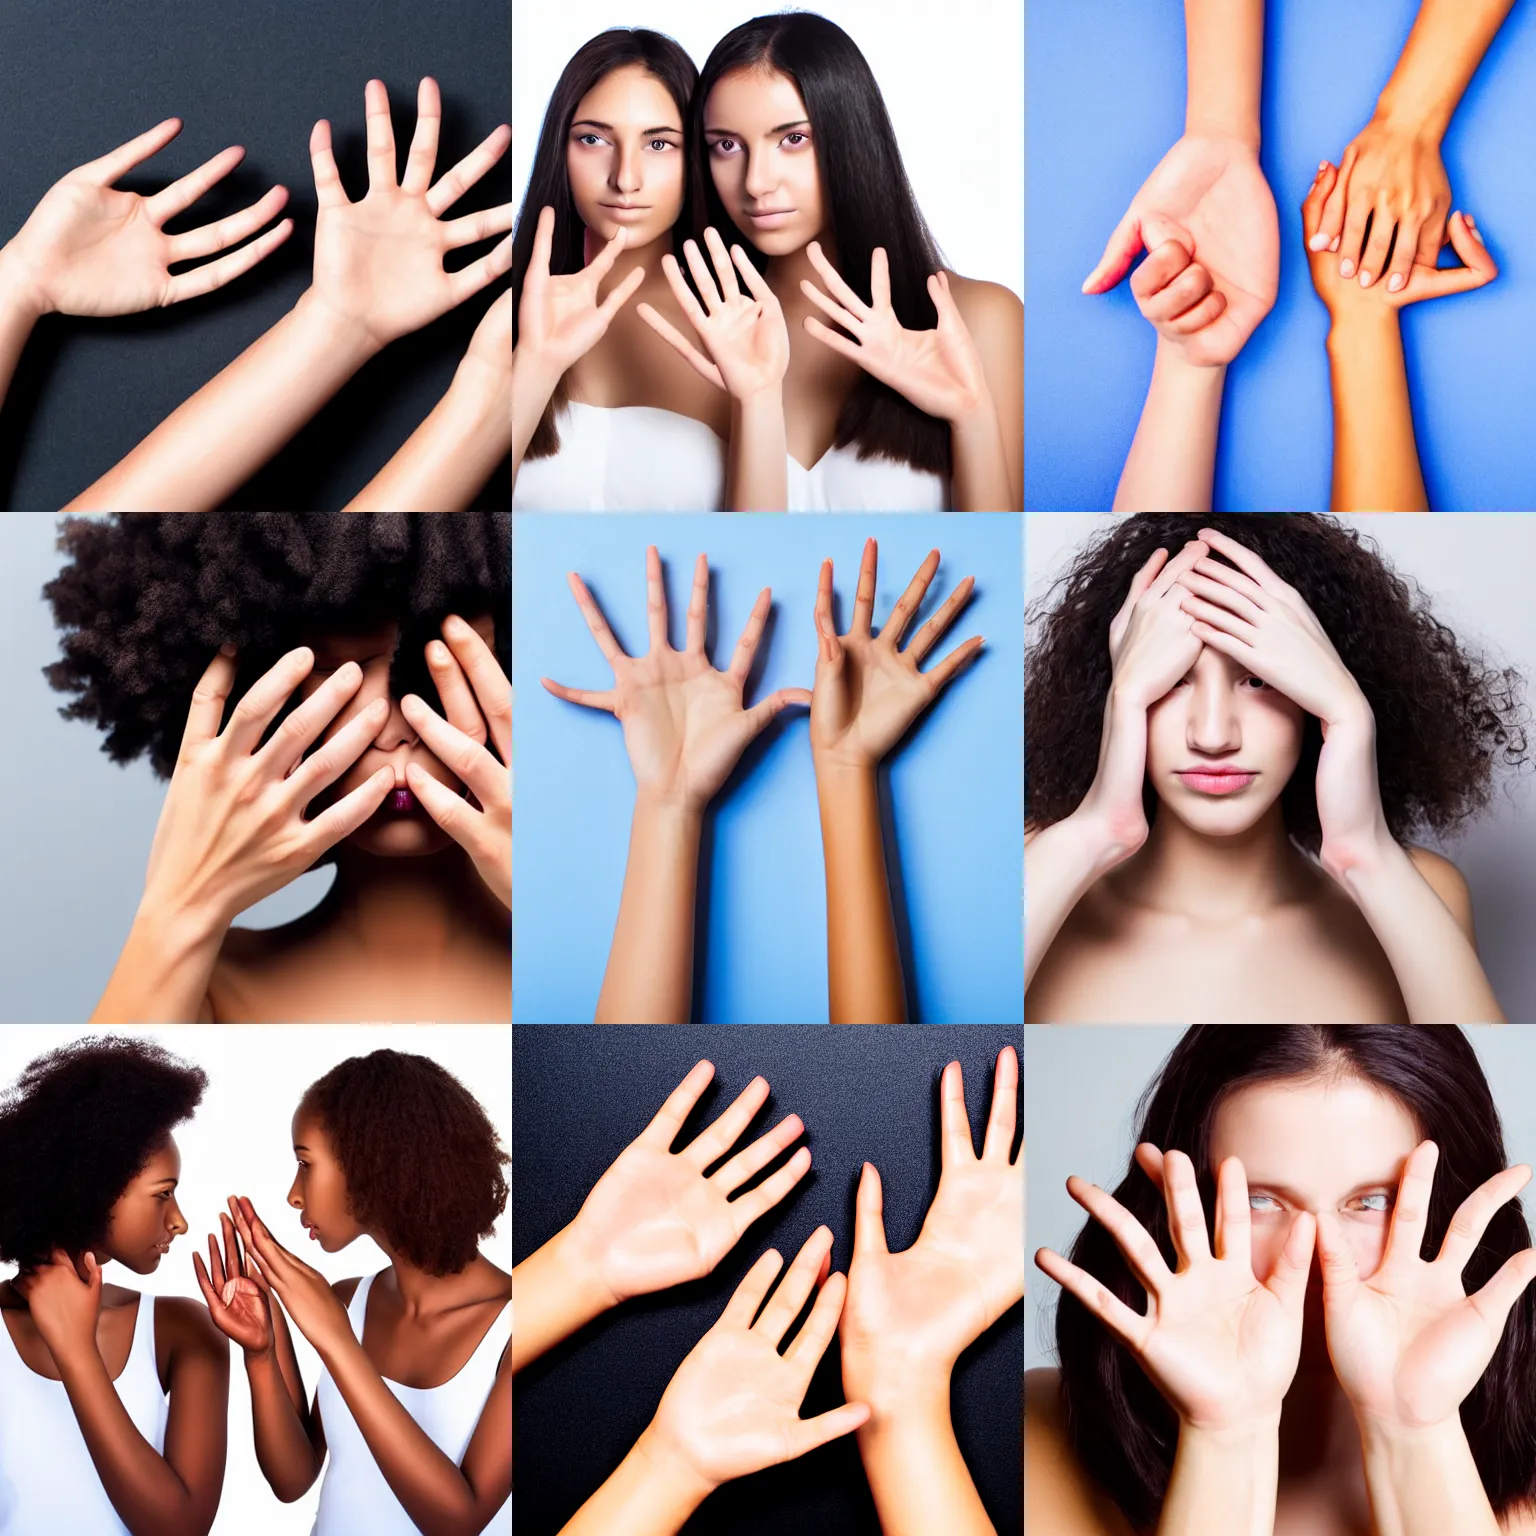 Prompt: both left and right female hands wrists, hand gestures, natural skin tones high-key lighting white background